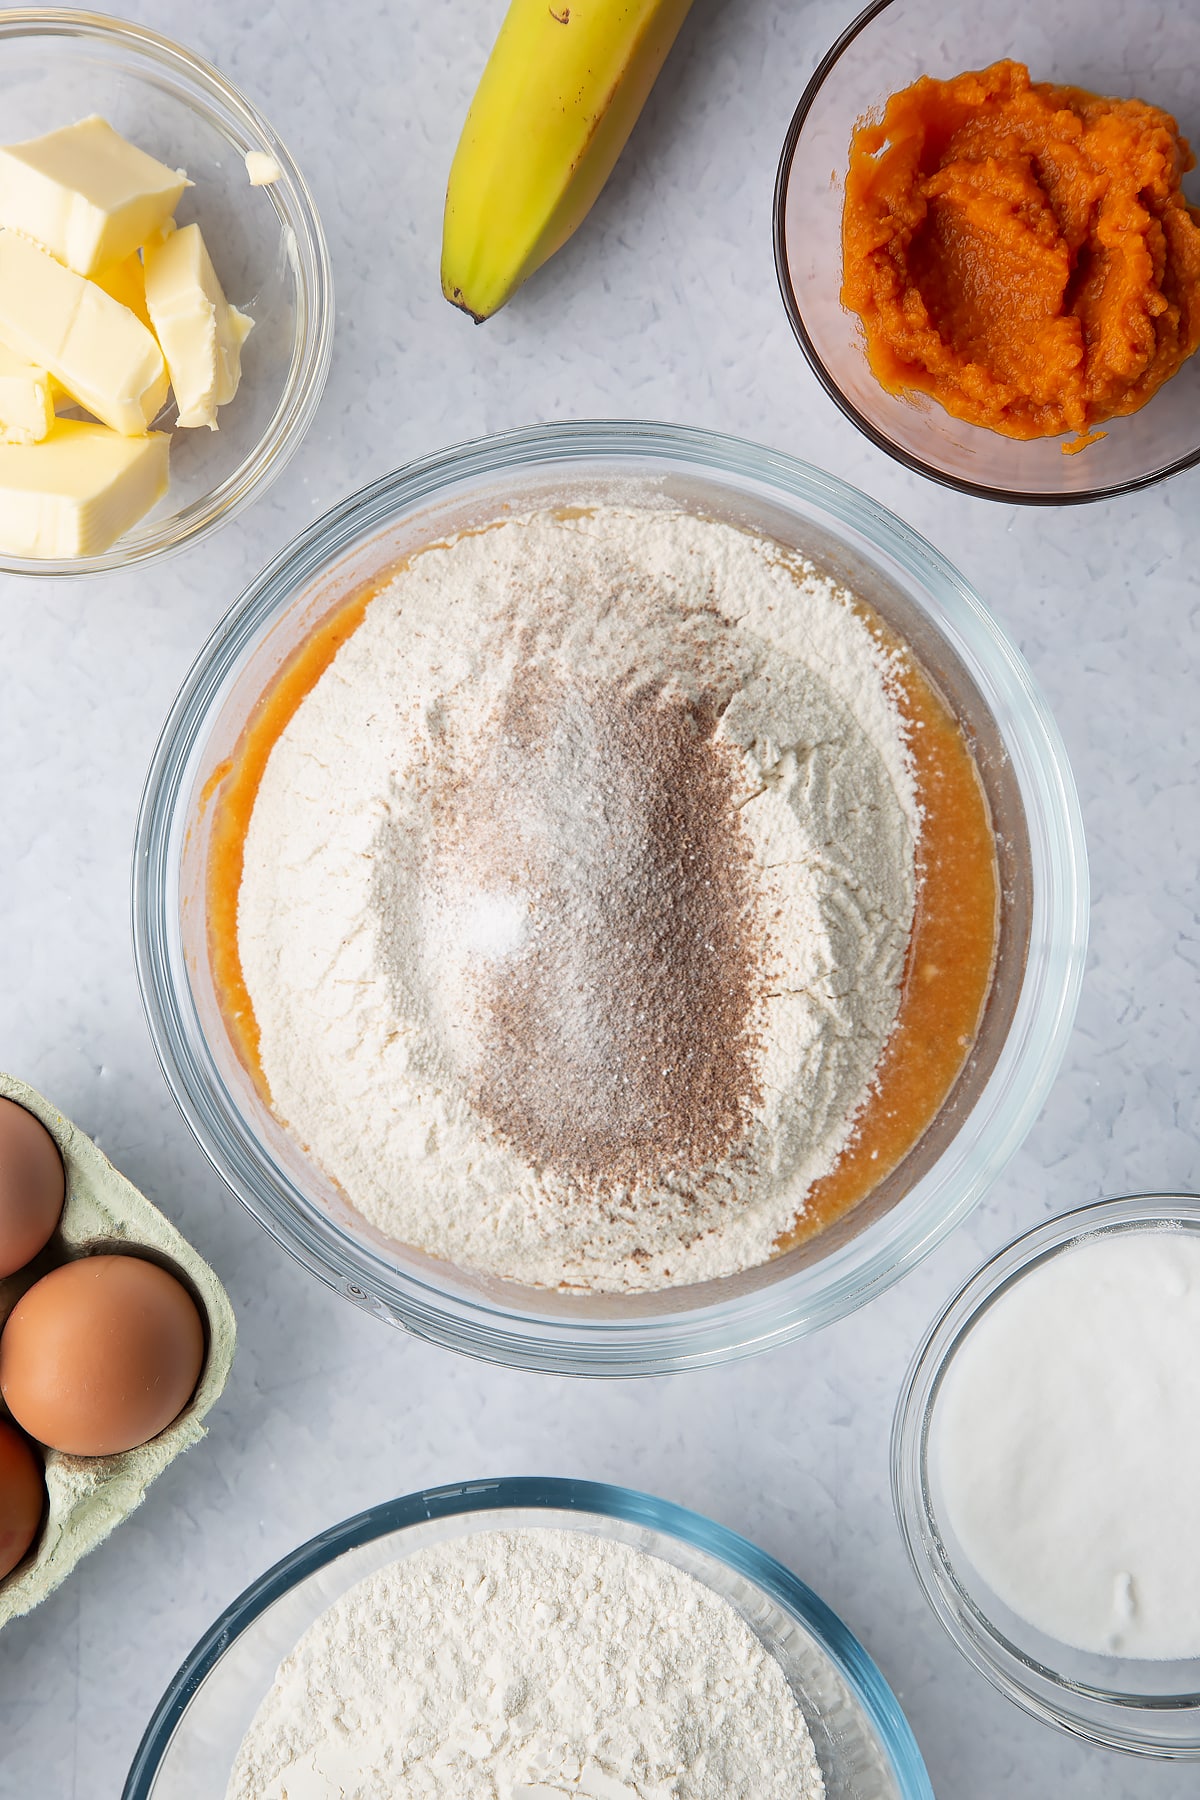 Mashed banana mixed with pumpkin puree, eggs, sugar and melted butter in a glass mixing bowl with flour, baking powder and mixed spice on top. Ingredients to make pumpkin banana bread surround the bowl.